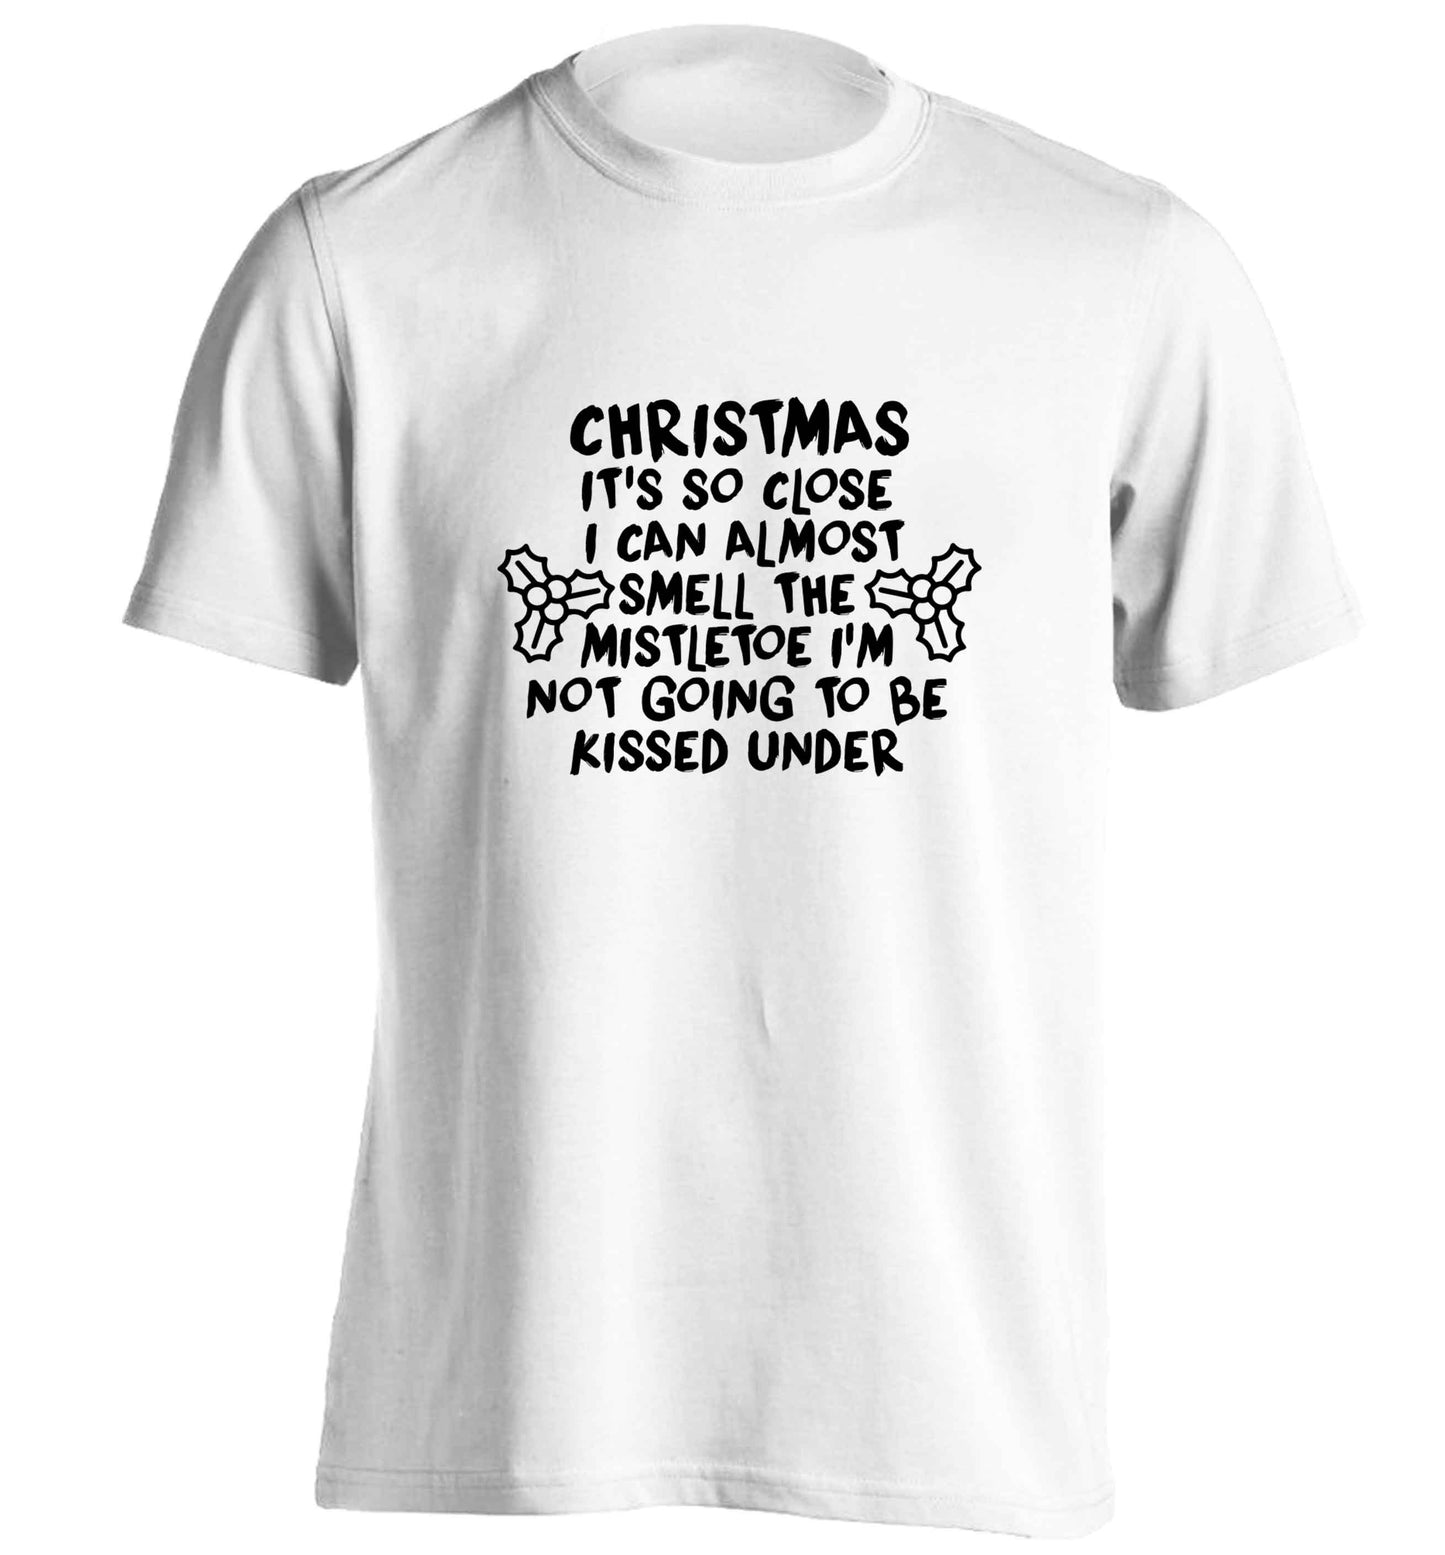 Christmas it's so close I can almost smell the misteltoe I'm not going to be kissed under adults unisex white Tshirt 2XL